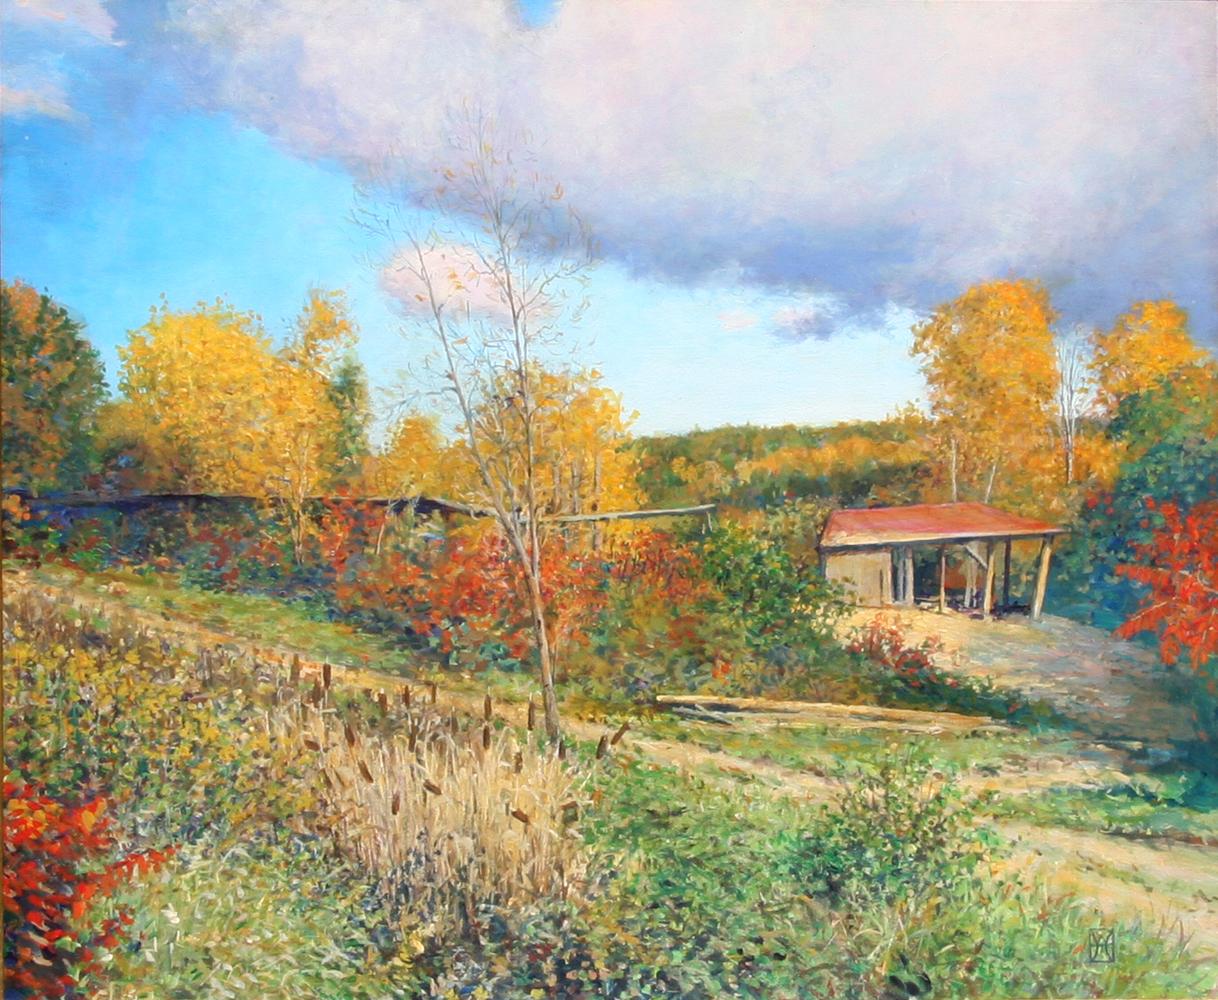 "The Old Sawmill at Westminster, Vermont", by Wally Ames